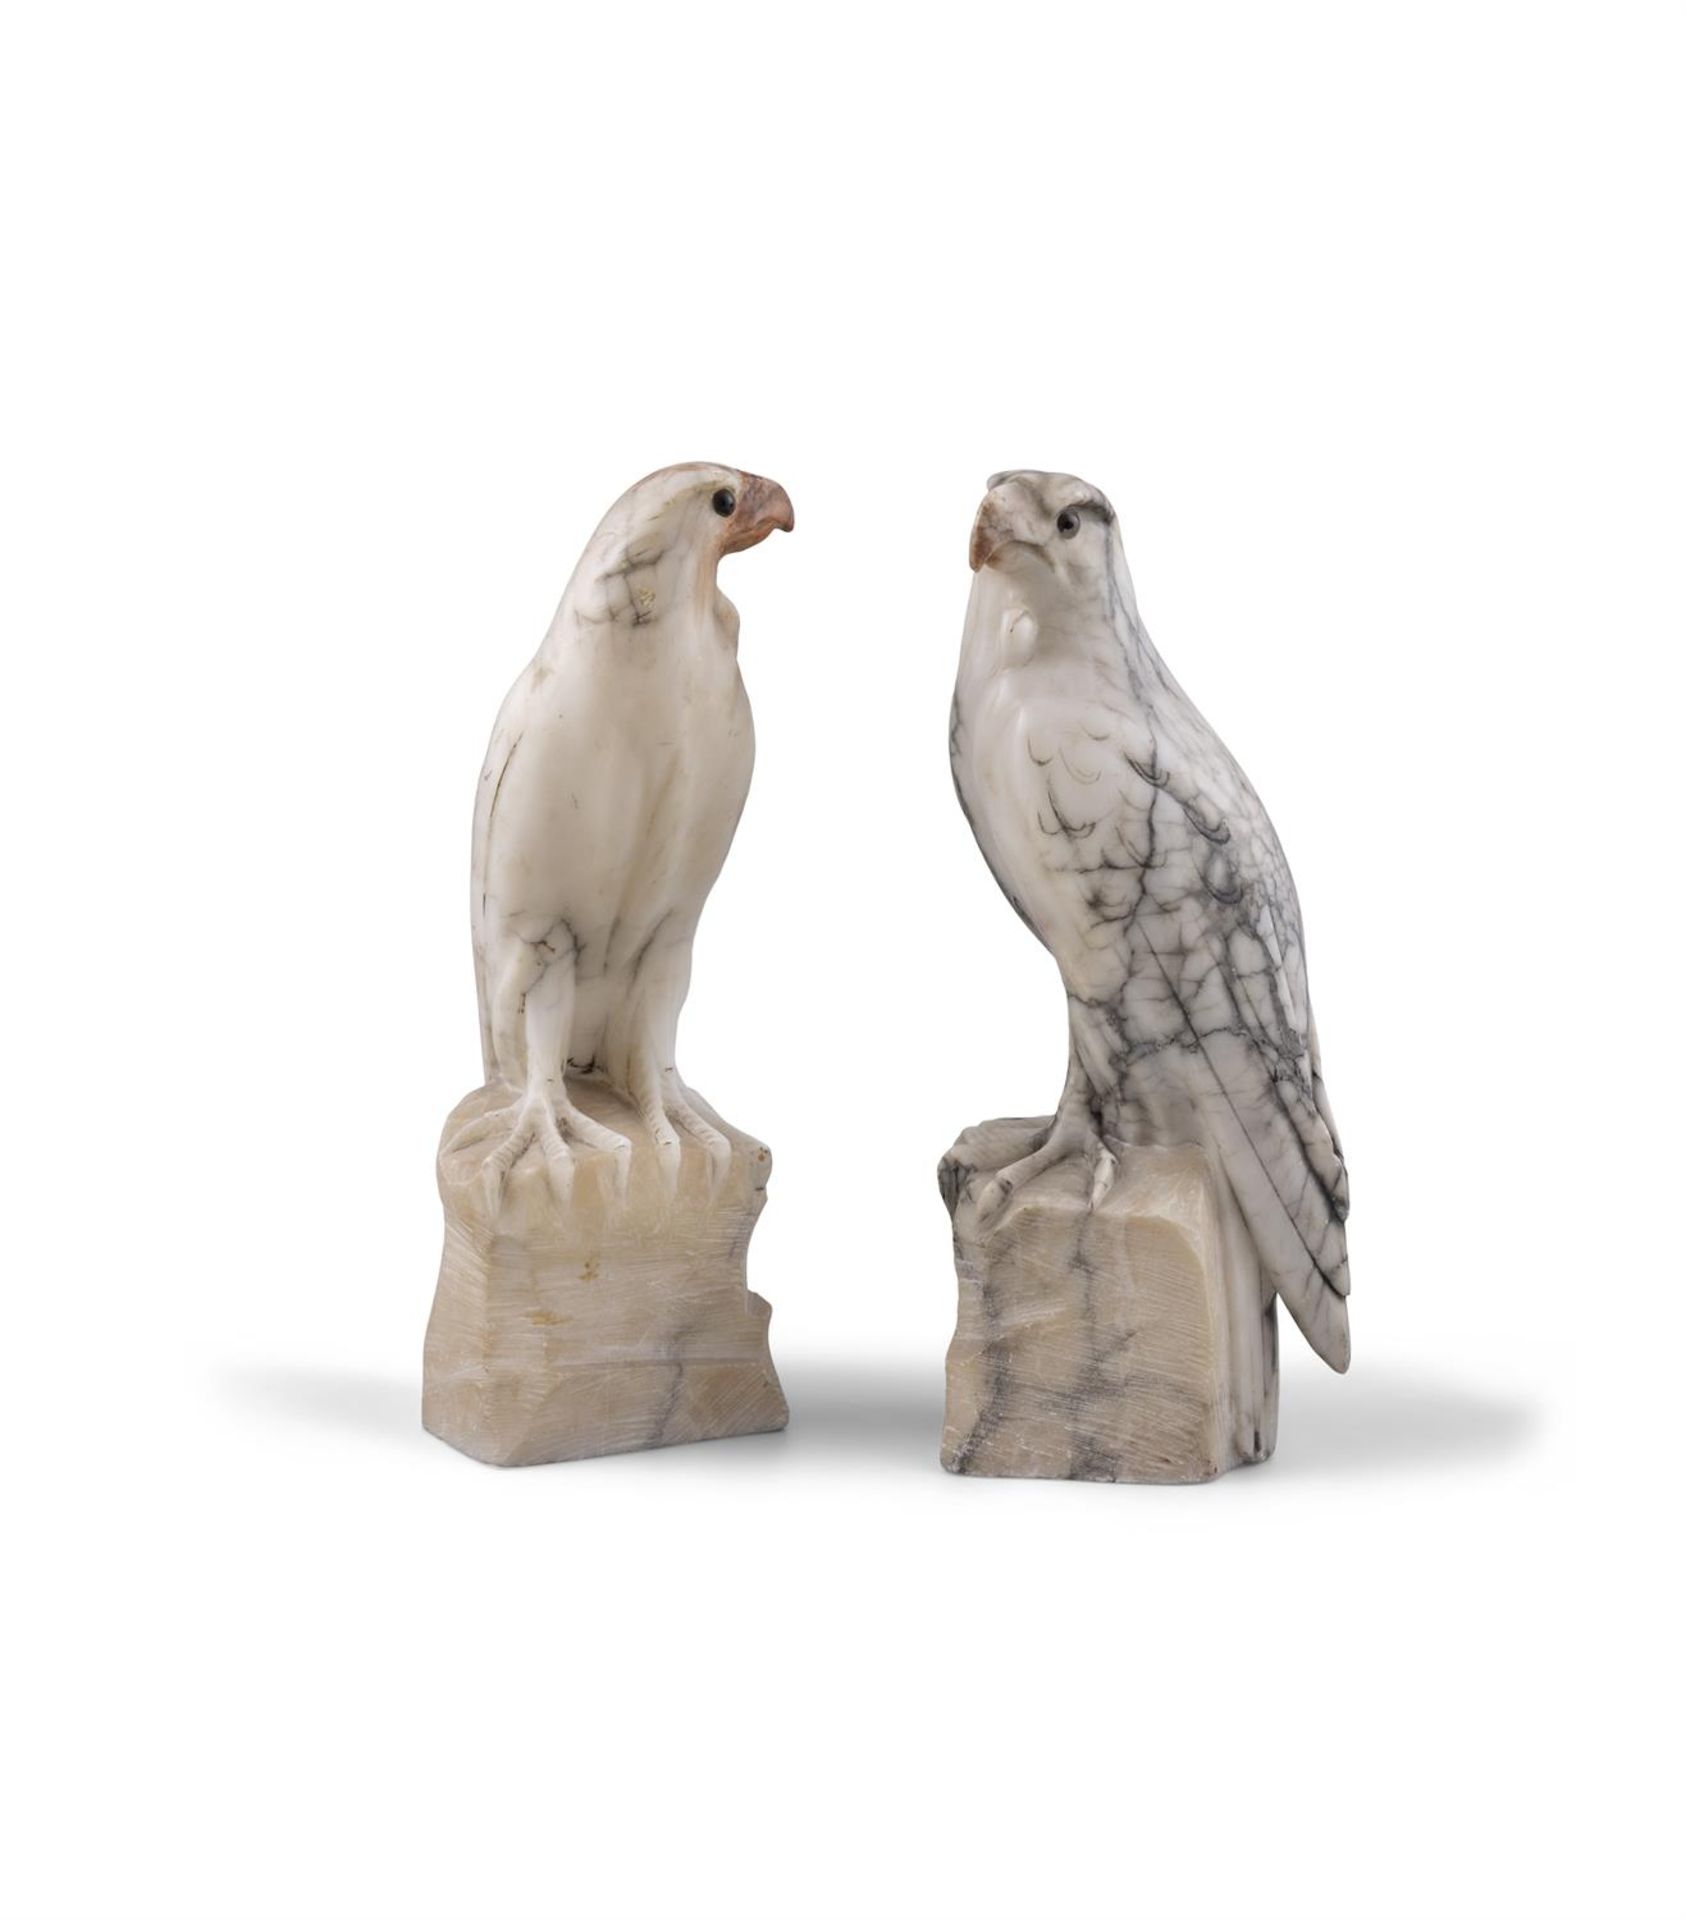 A PAIR OF CARVED WHITE VARIEGATED MARBLE MODELS OF HAWKS PERCHED ON ROCKY OUTCROPS. 31cm high - Image 2 of 4